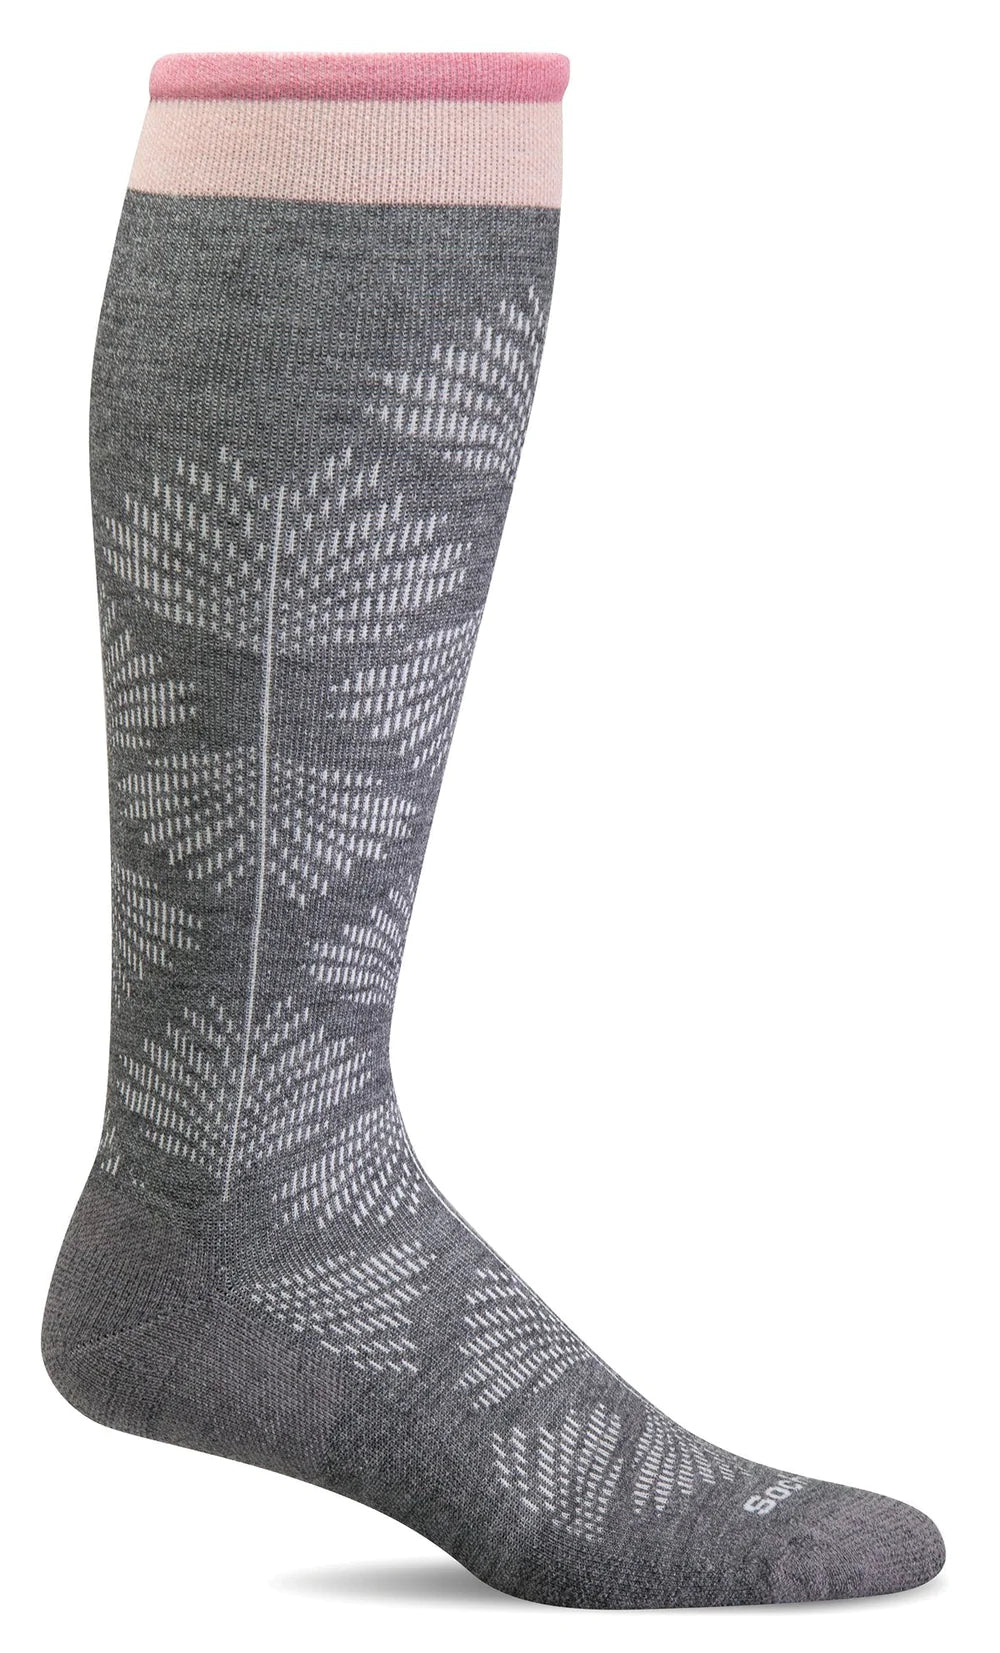 Sockwell - Women's Full Floral Moderate Graduated Compression Socks Wide Calf Fit - Charcoal